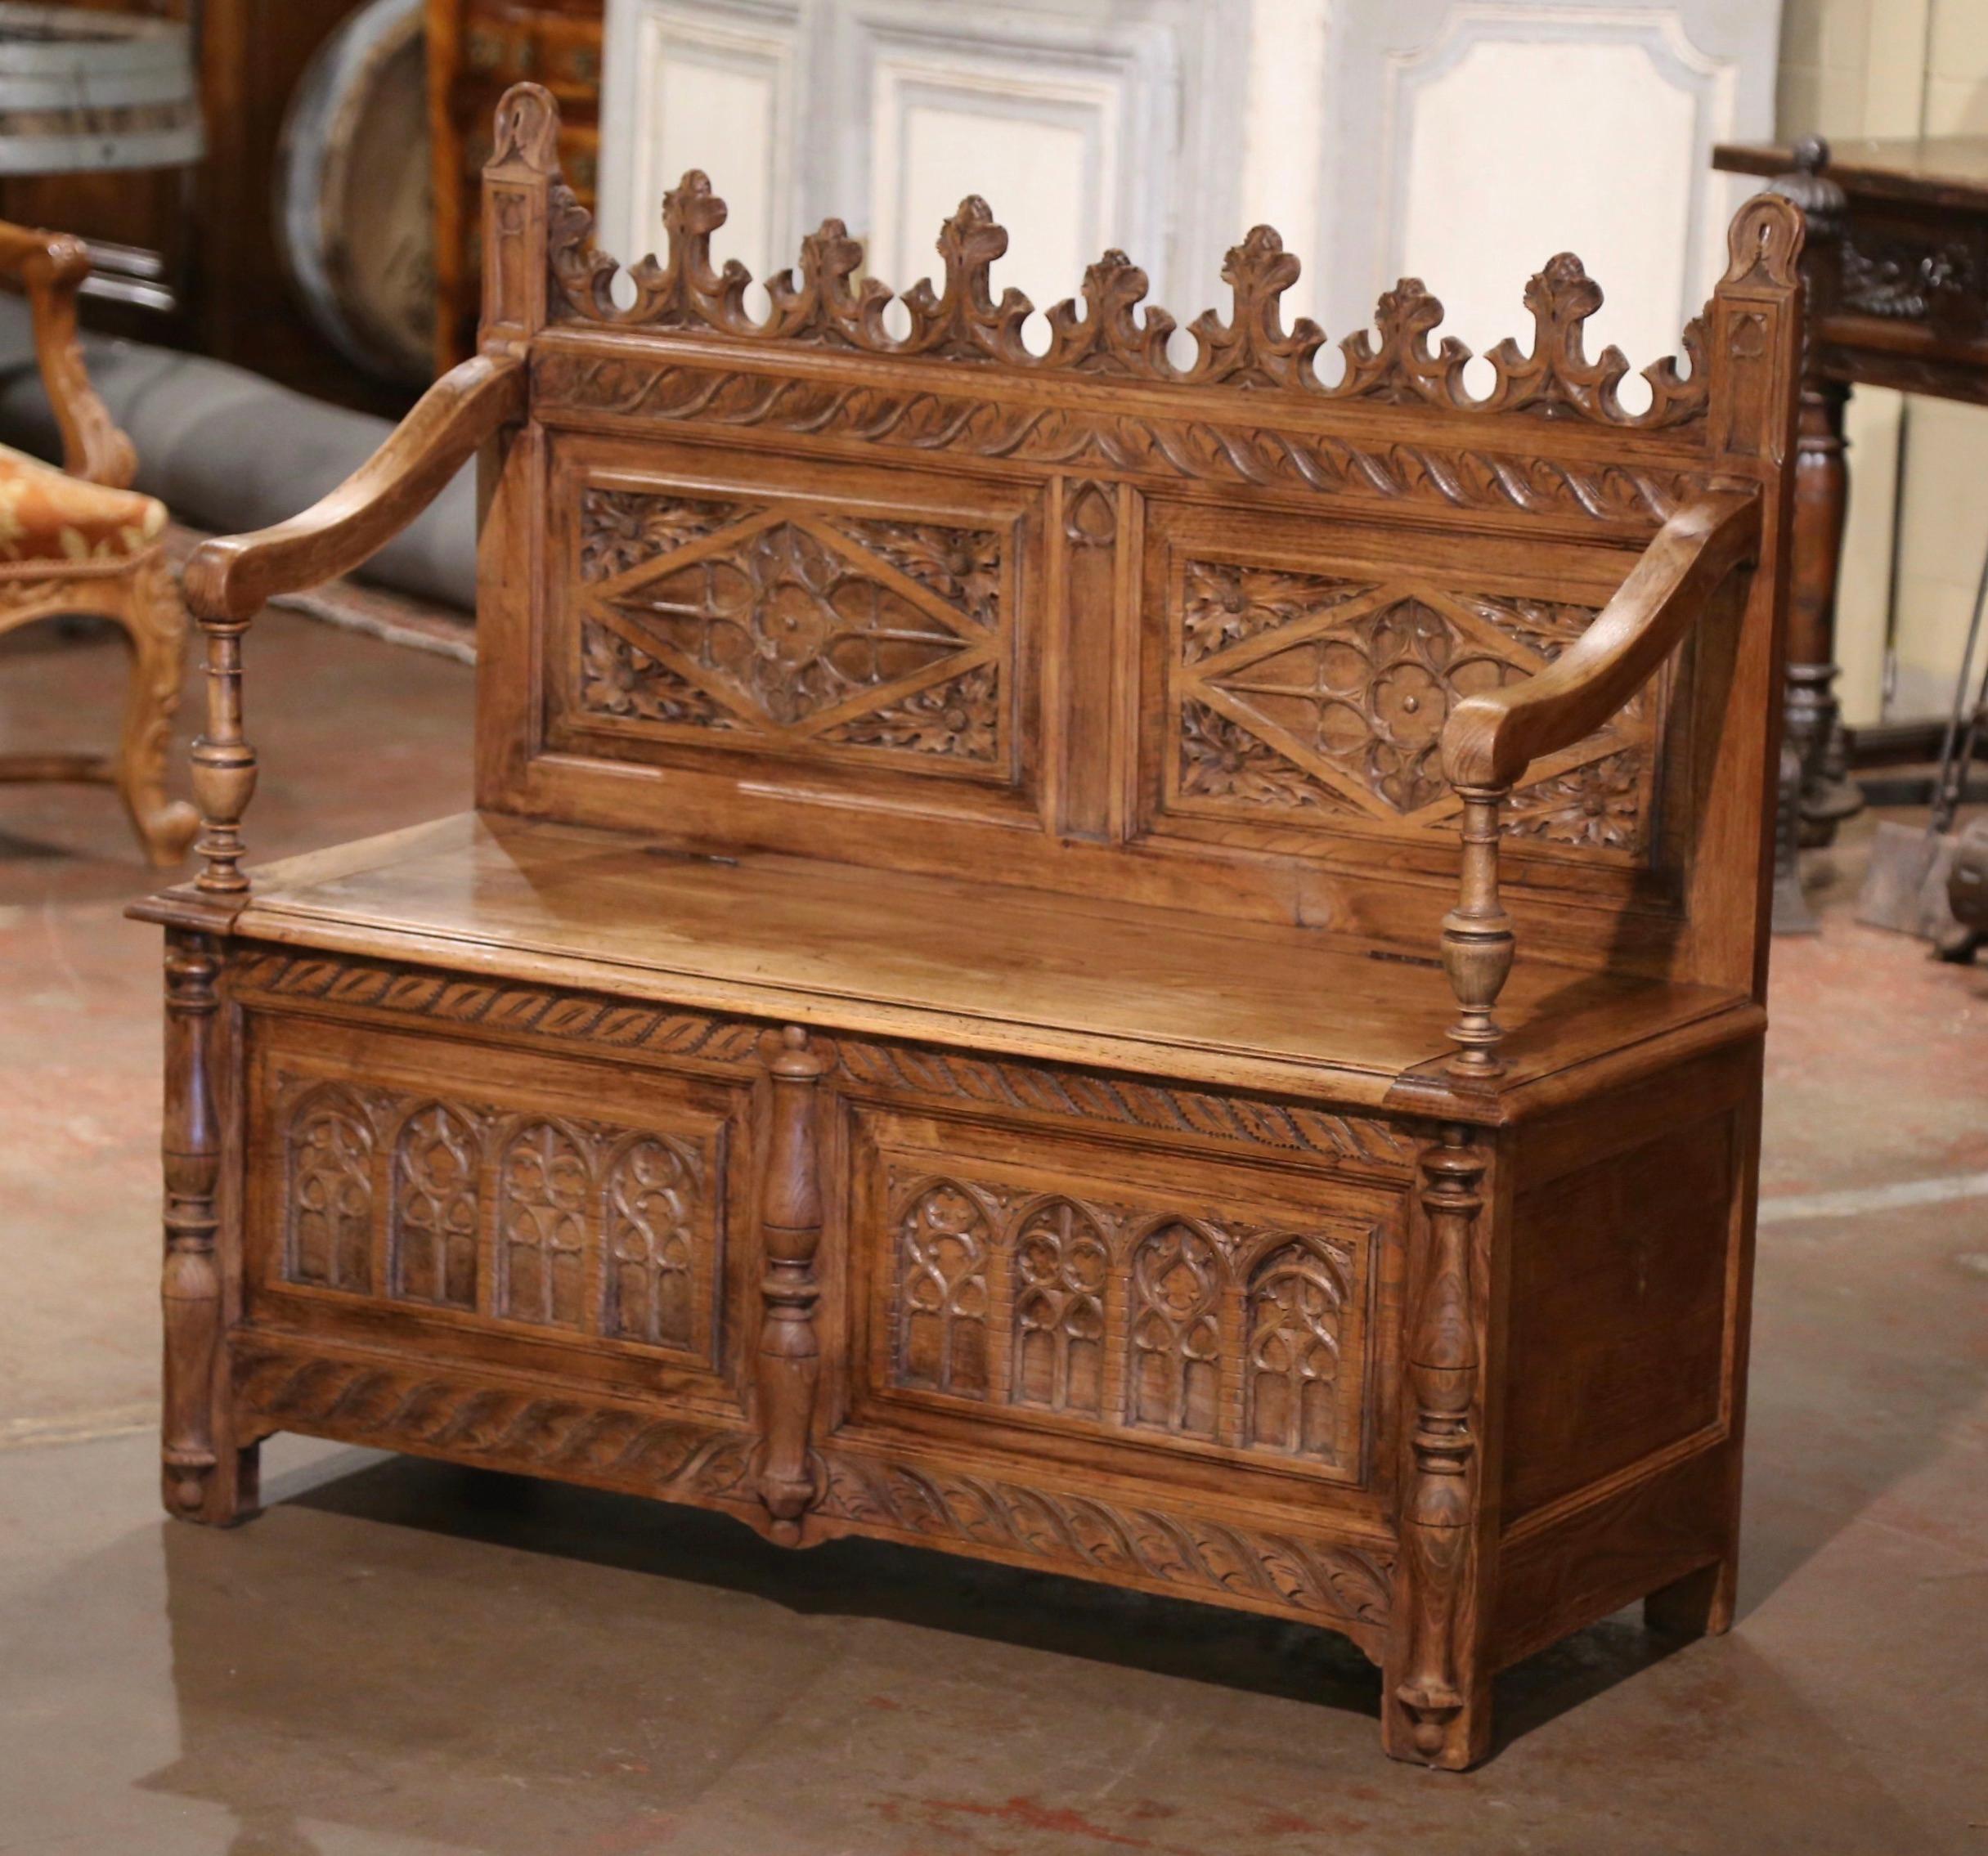 19th Century French Gothic Revival Carved Bleached Oak Hall Bench with Trapdoor For Sale 2